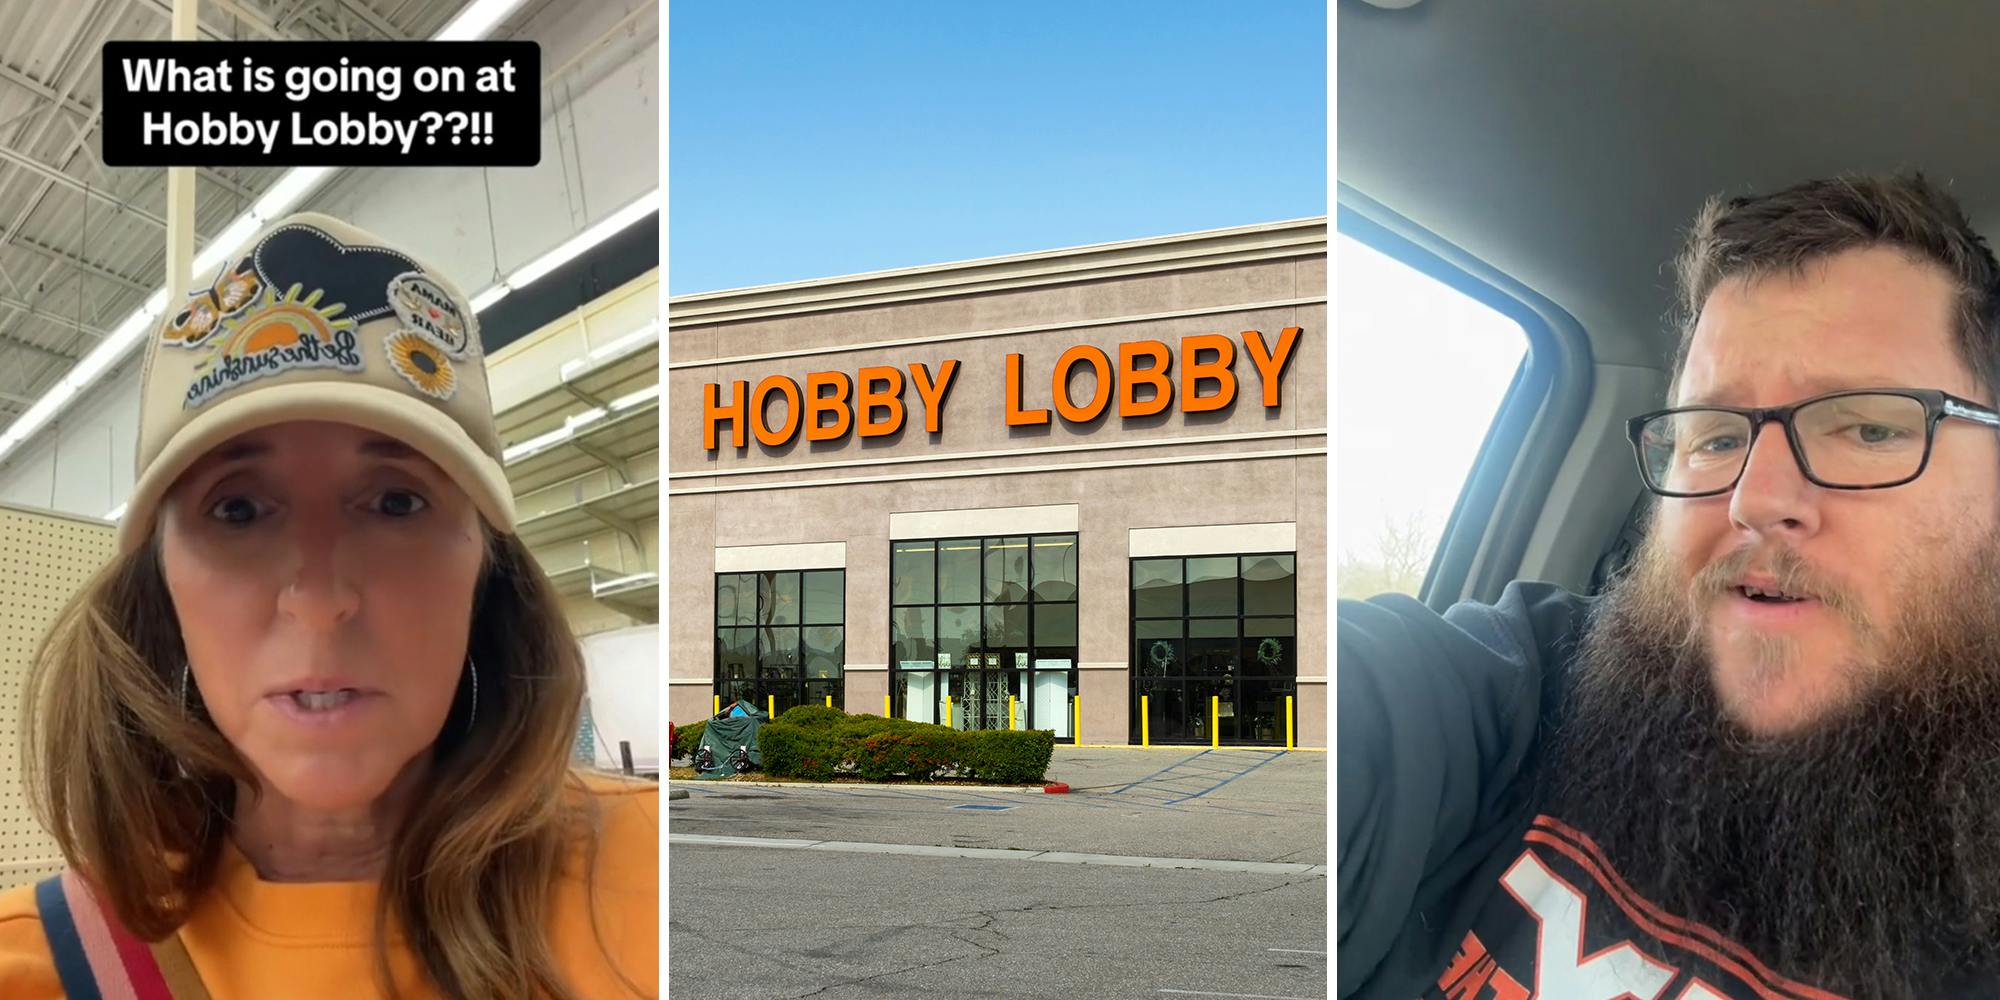 ‘It’s just an expensive Dollar Tree now’: Worker explains what’s really going on with Hobby Lobby